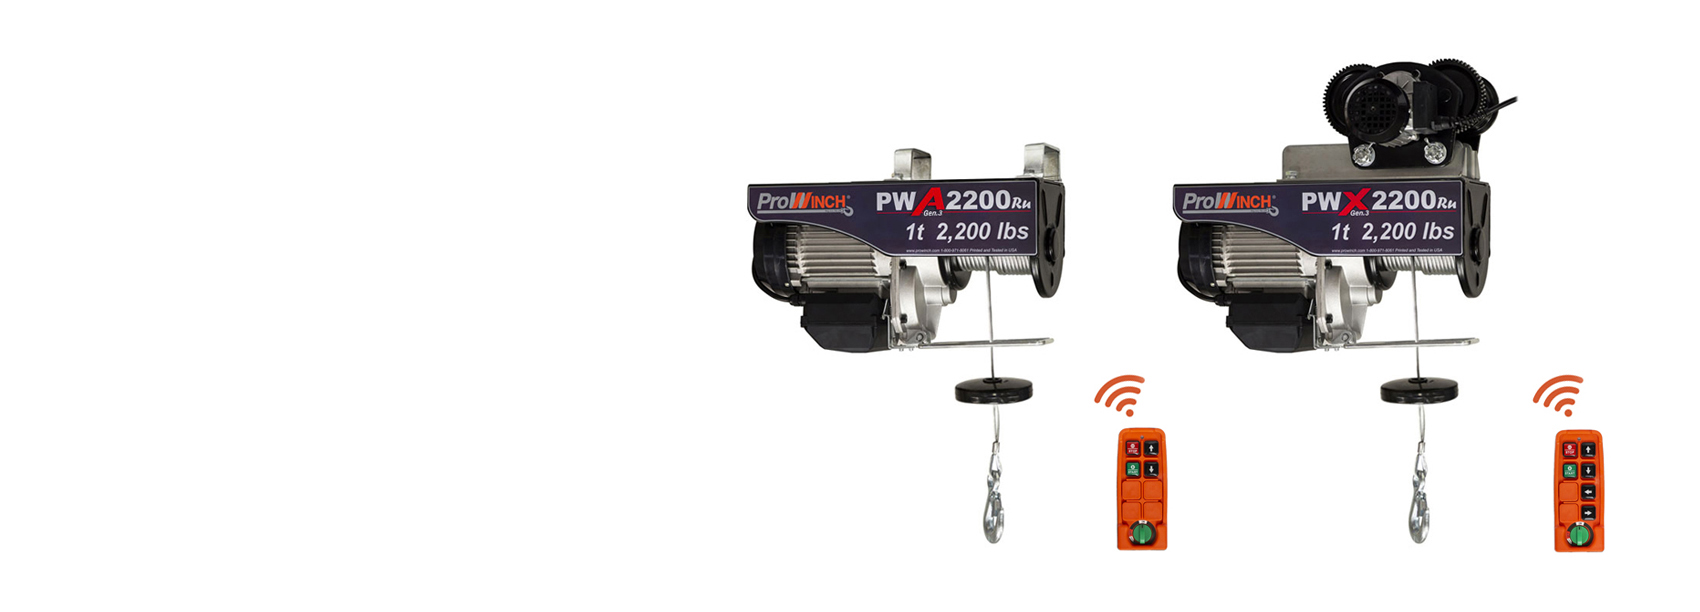 Prowinch 1/2 ton Electric Wire Rope Hoist with Wireless Remote Control System Includes an Extra Transmitter and a 6 feet Sling 